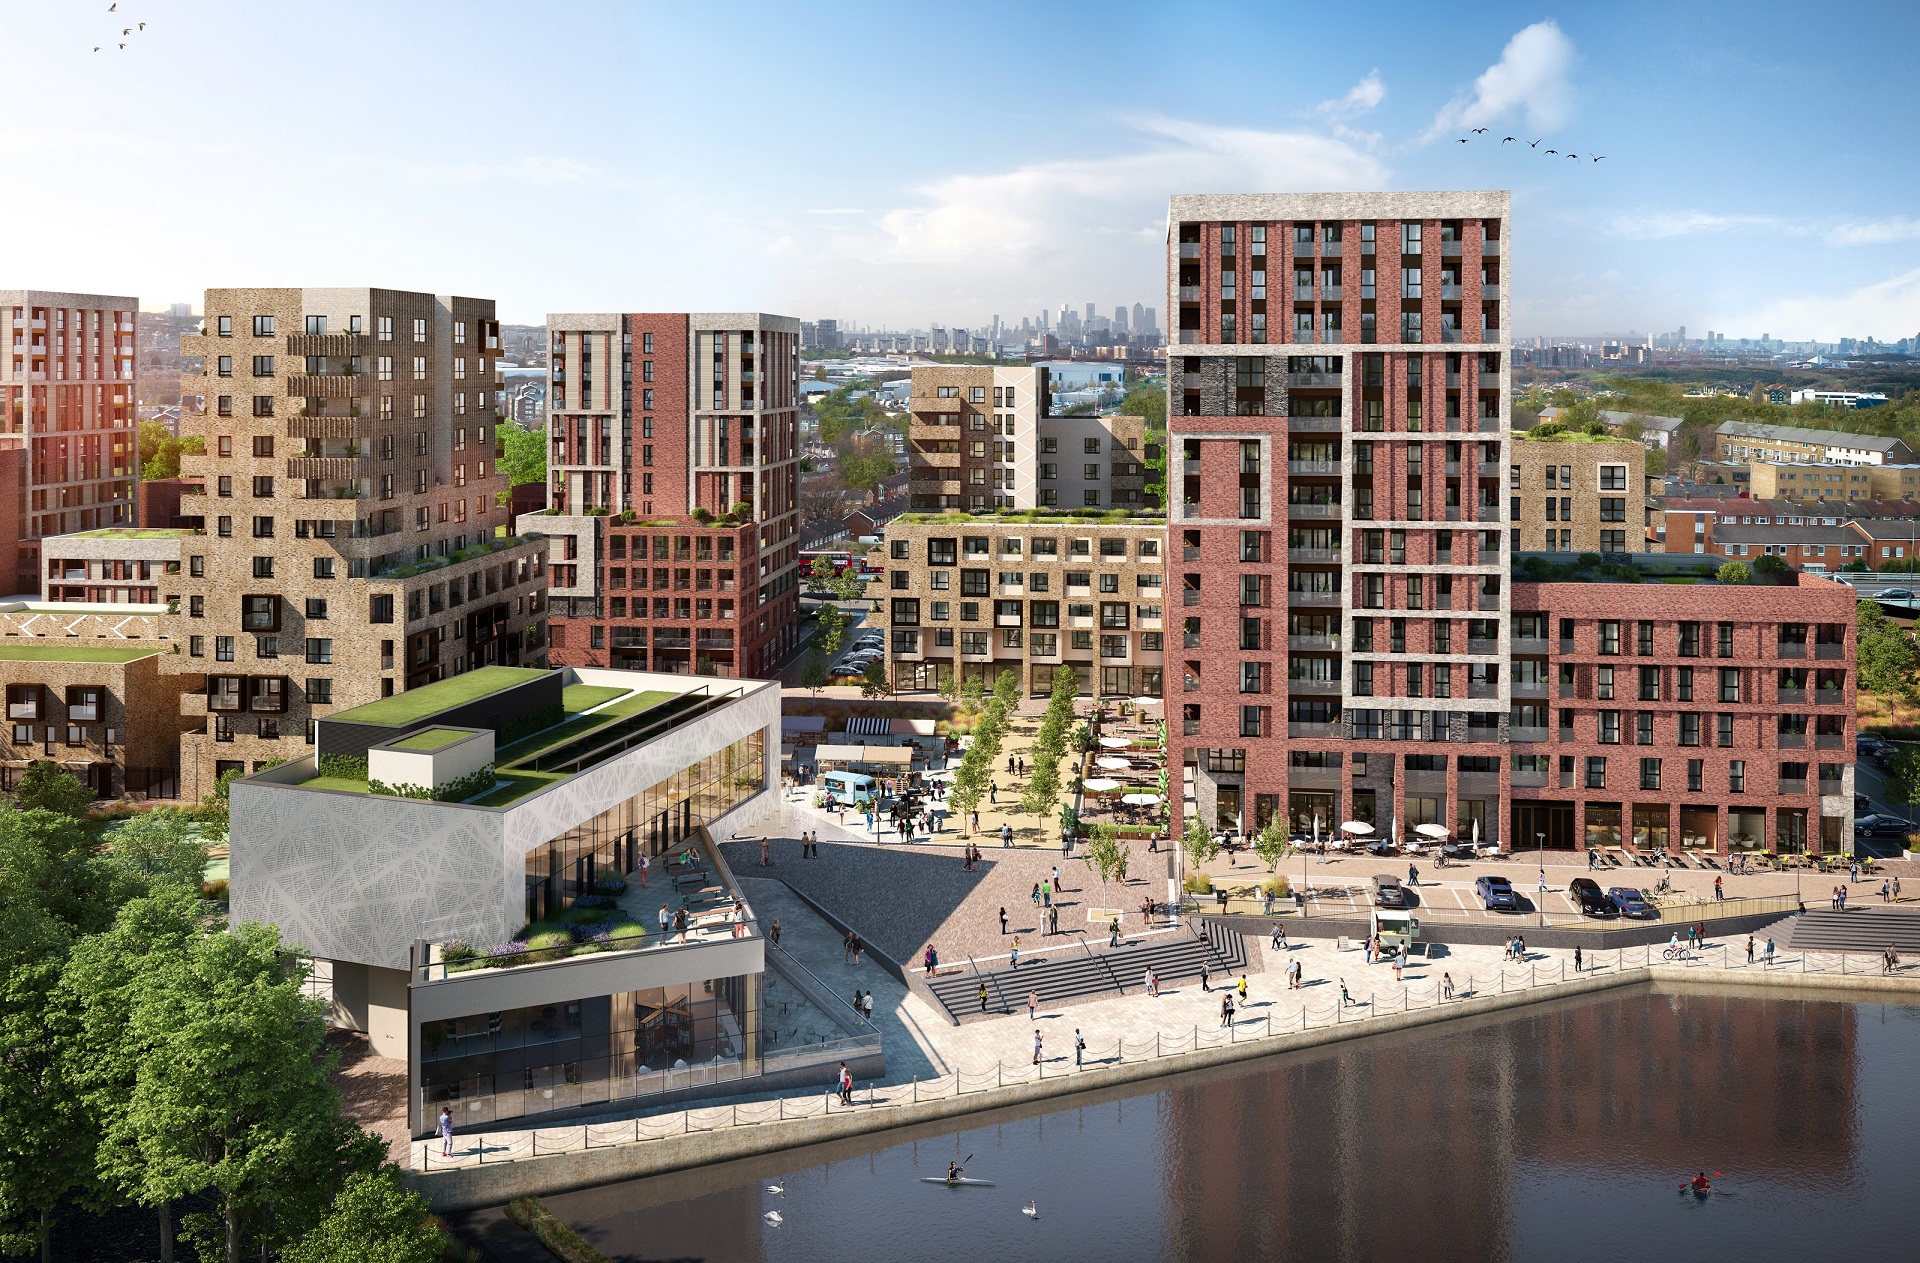 External CGI of Peabody's Southmere Crane Court Development of apartments avaliable to buy through Help to Buy on Share to Buy